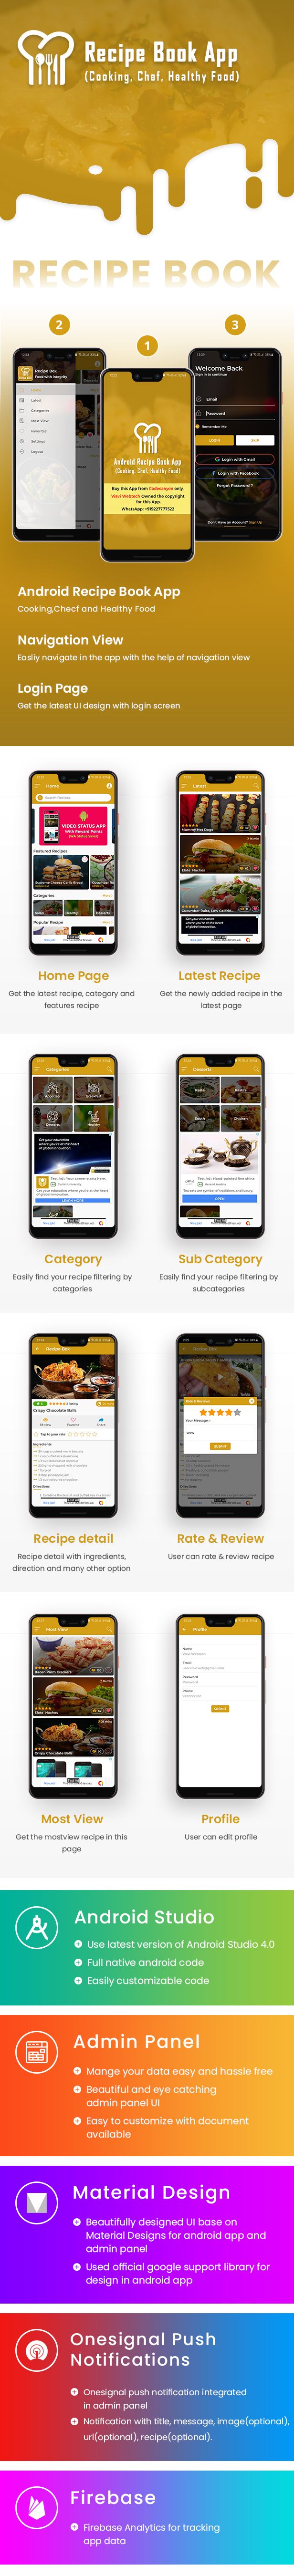 Android Recipe Book App (Cooking,Chef,Healthy Food, Admob with GDPR) - 7